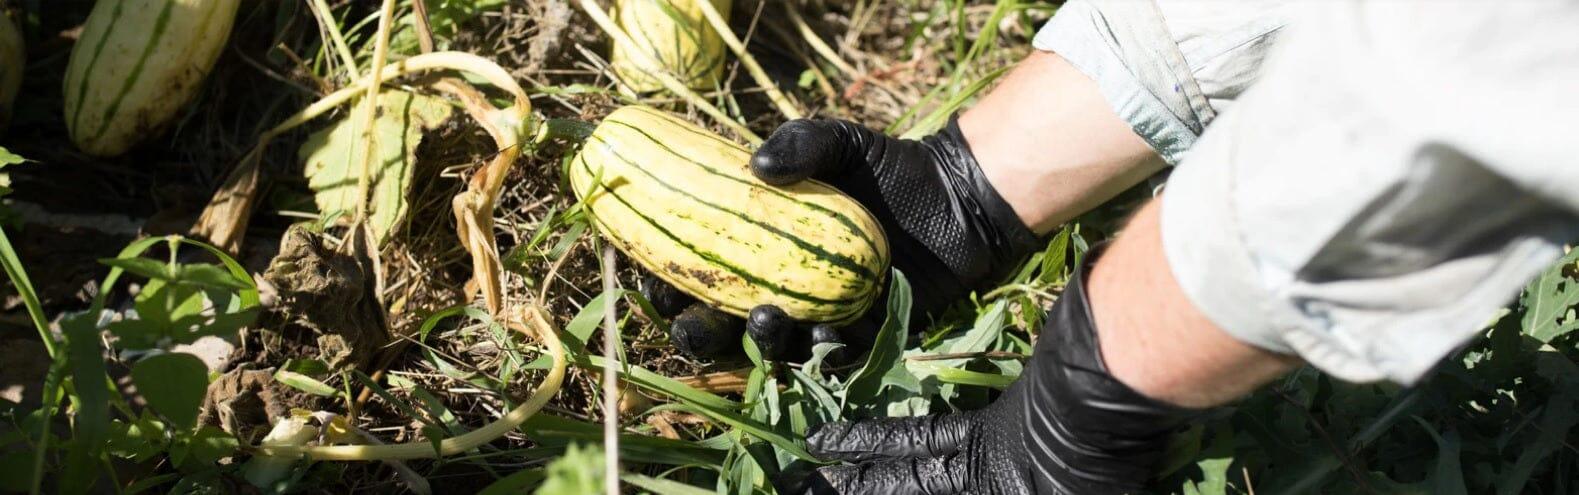 Enhancing Farming Practices with Disposable Gloves